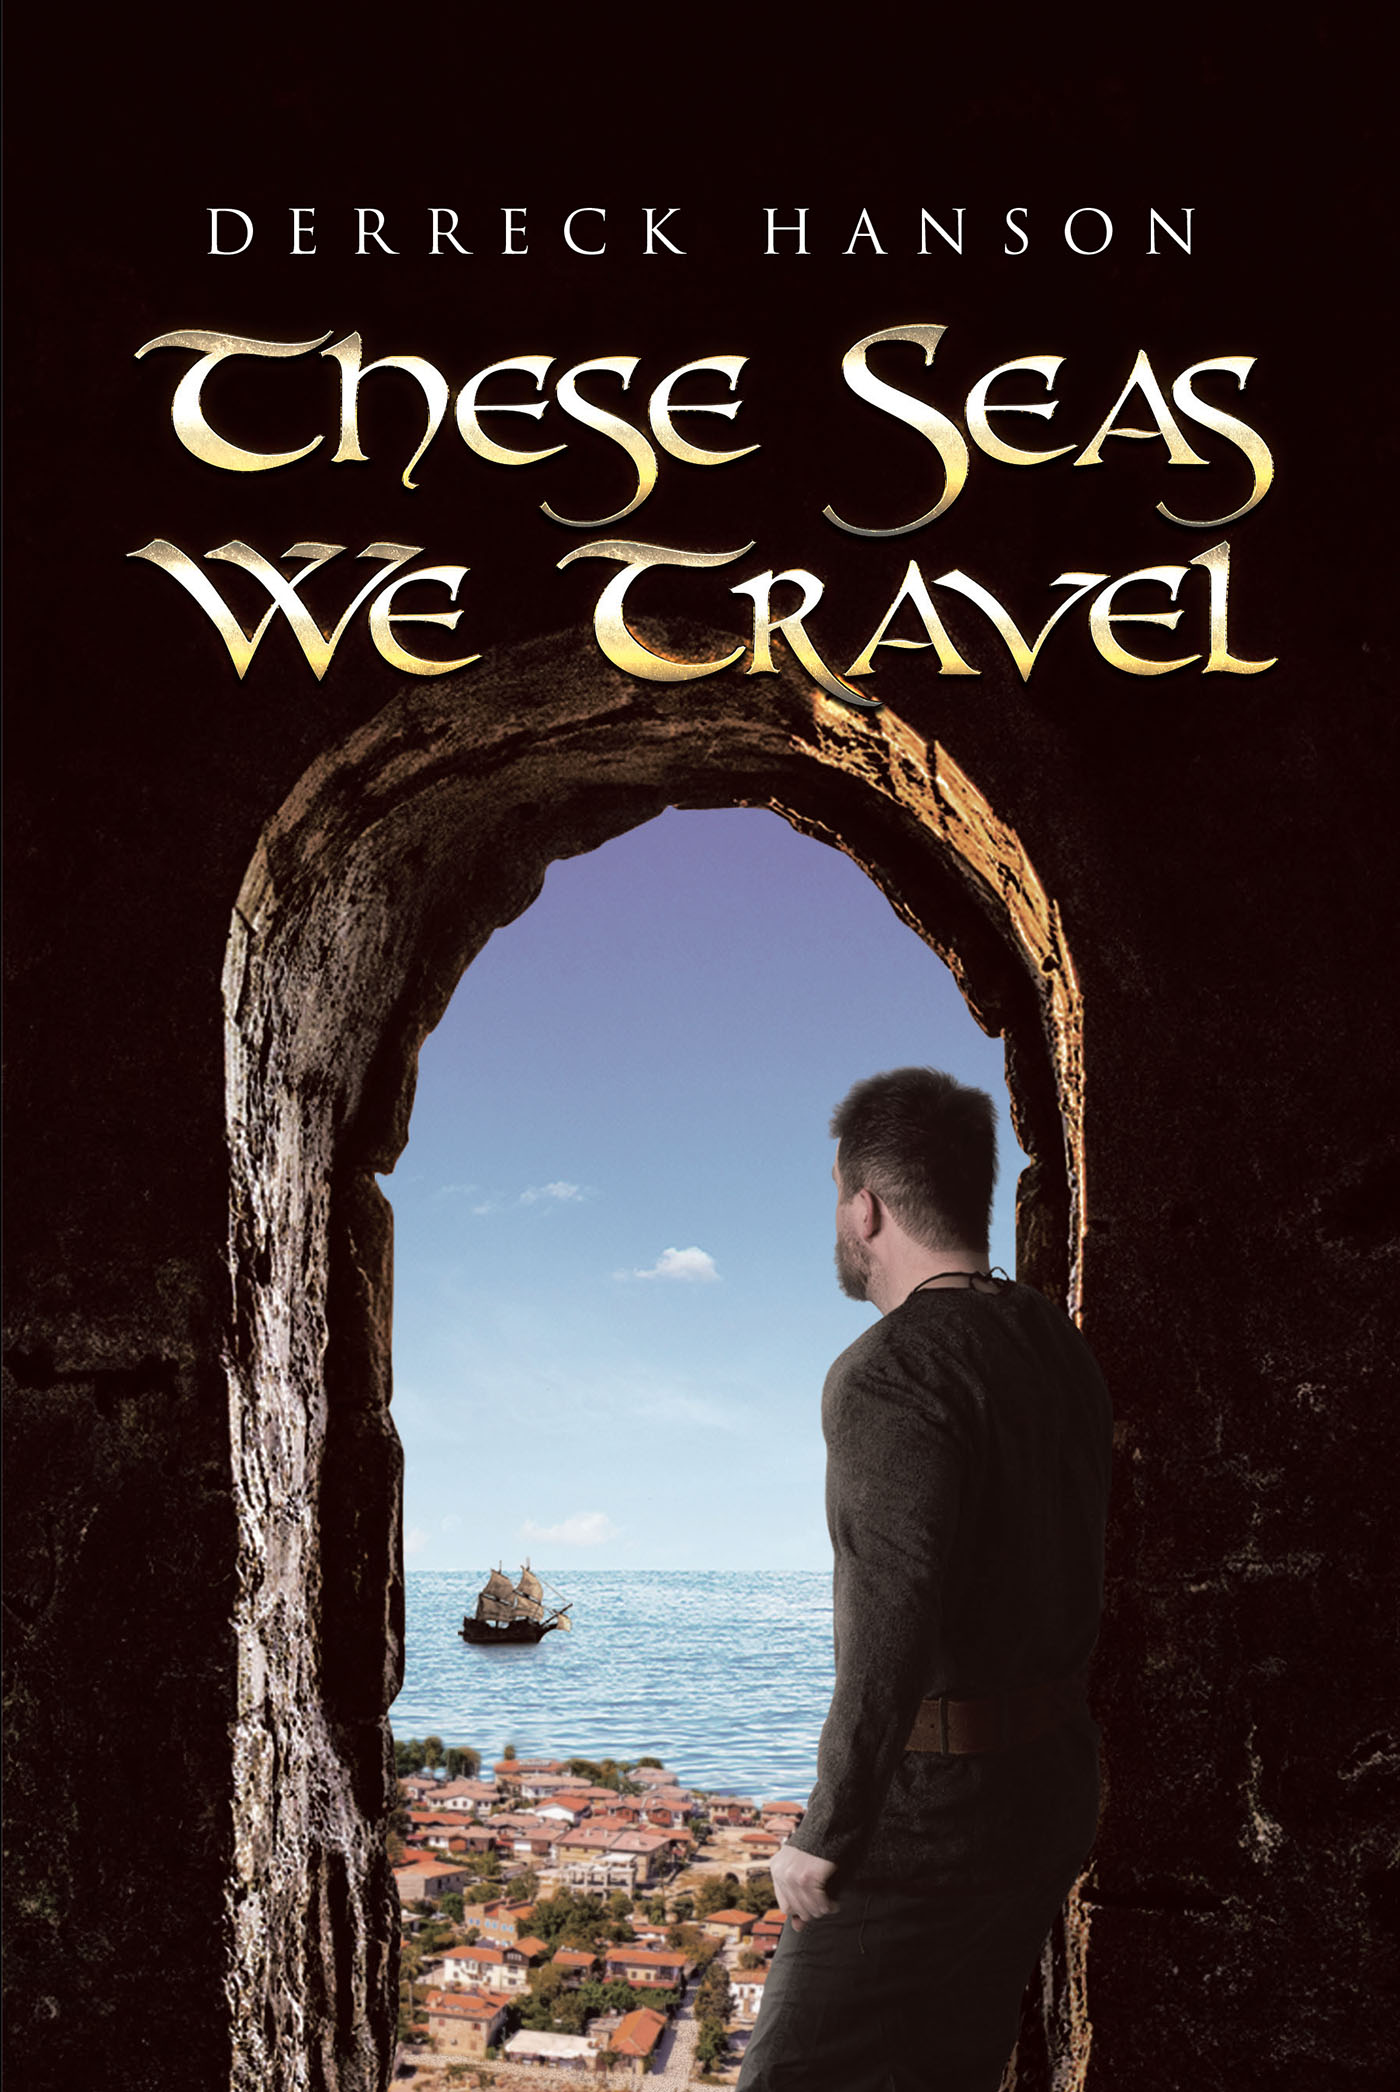 Derreck Hanson’s New Book, "These Seas We Travel," is an Adventurous and Captivating Tale That Follows a Close-Knit Group Across Two Generations